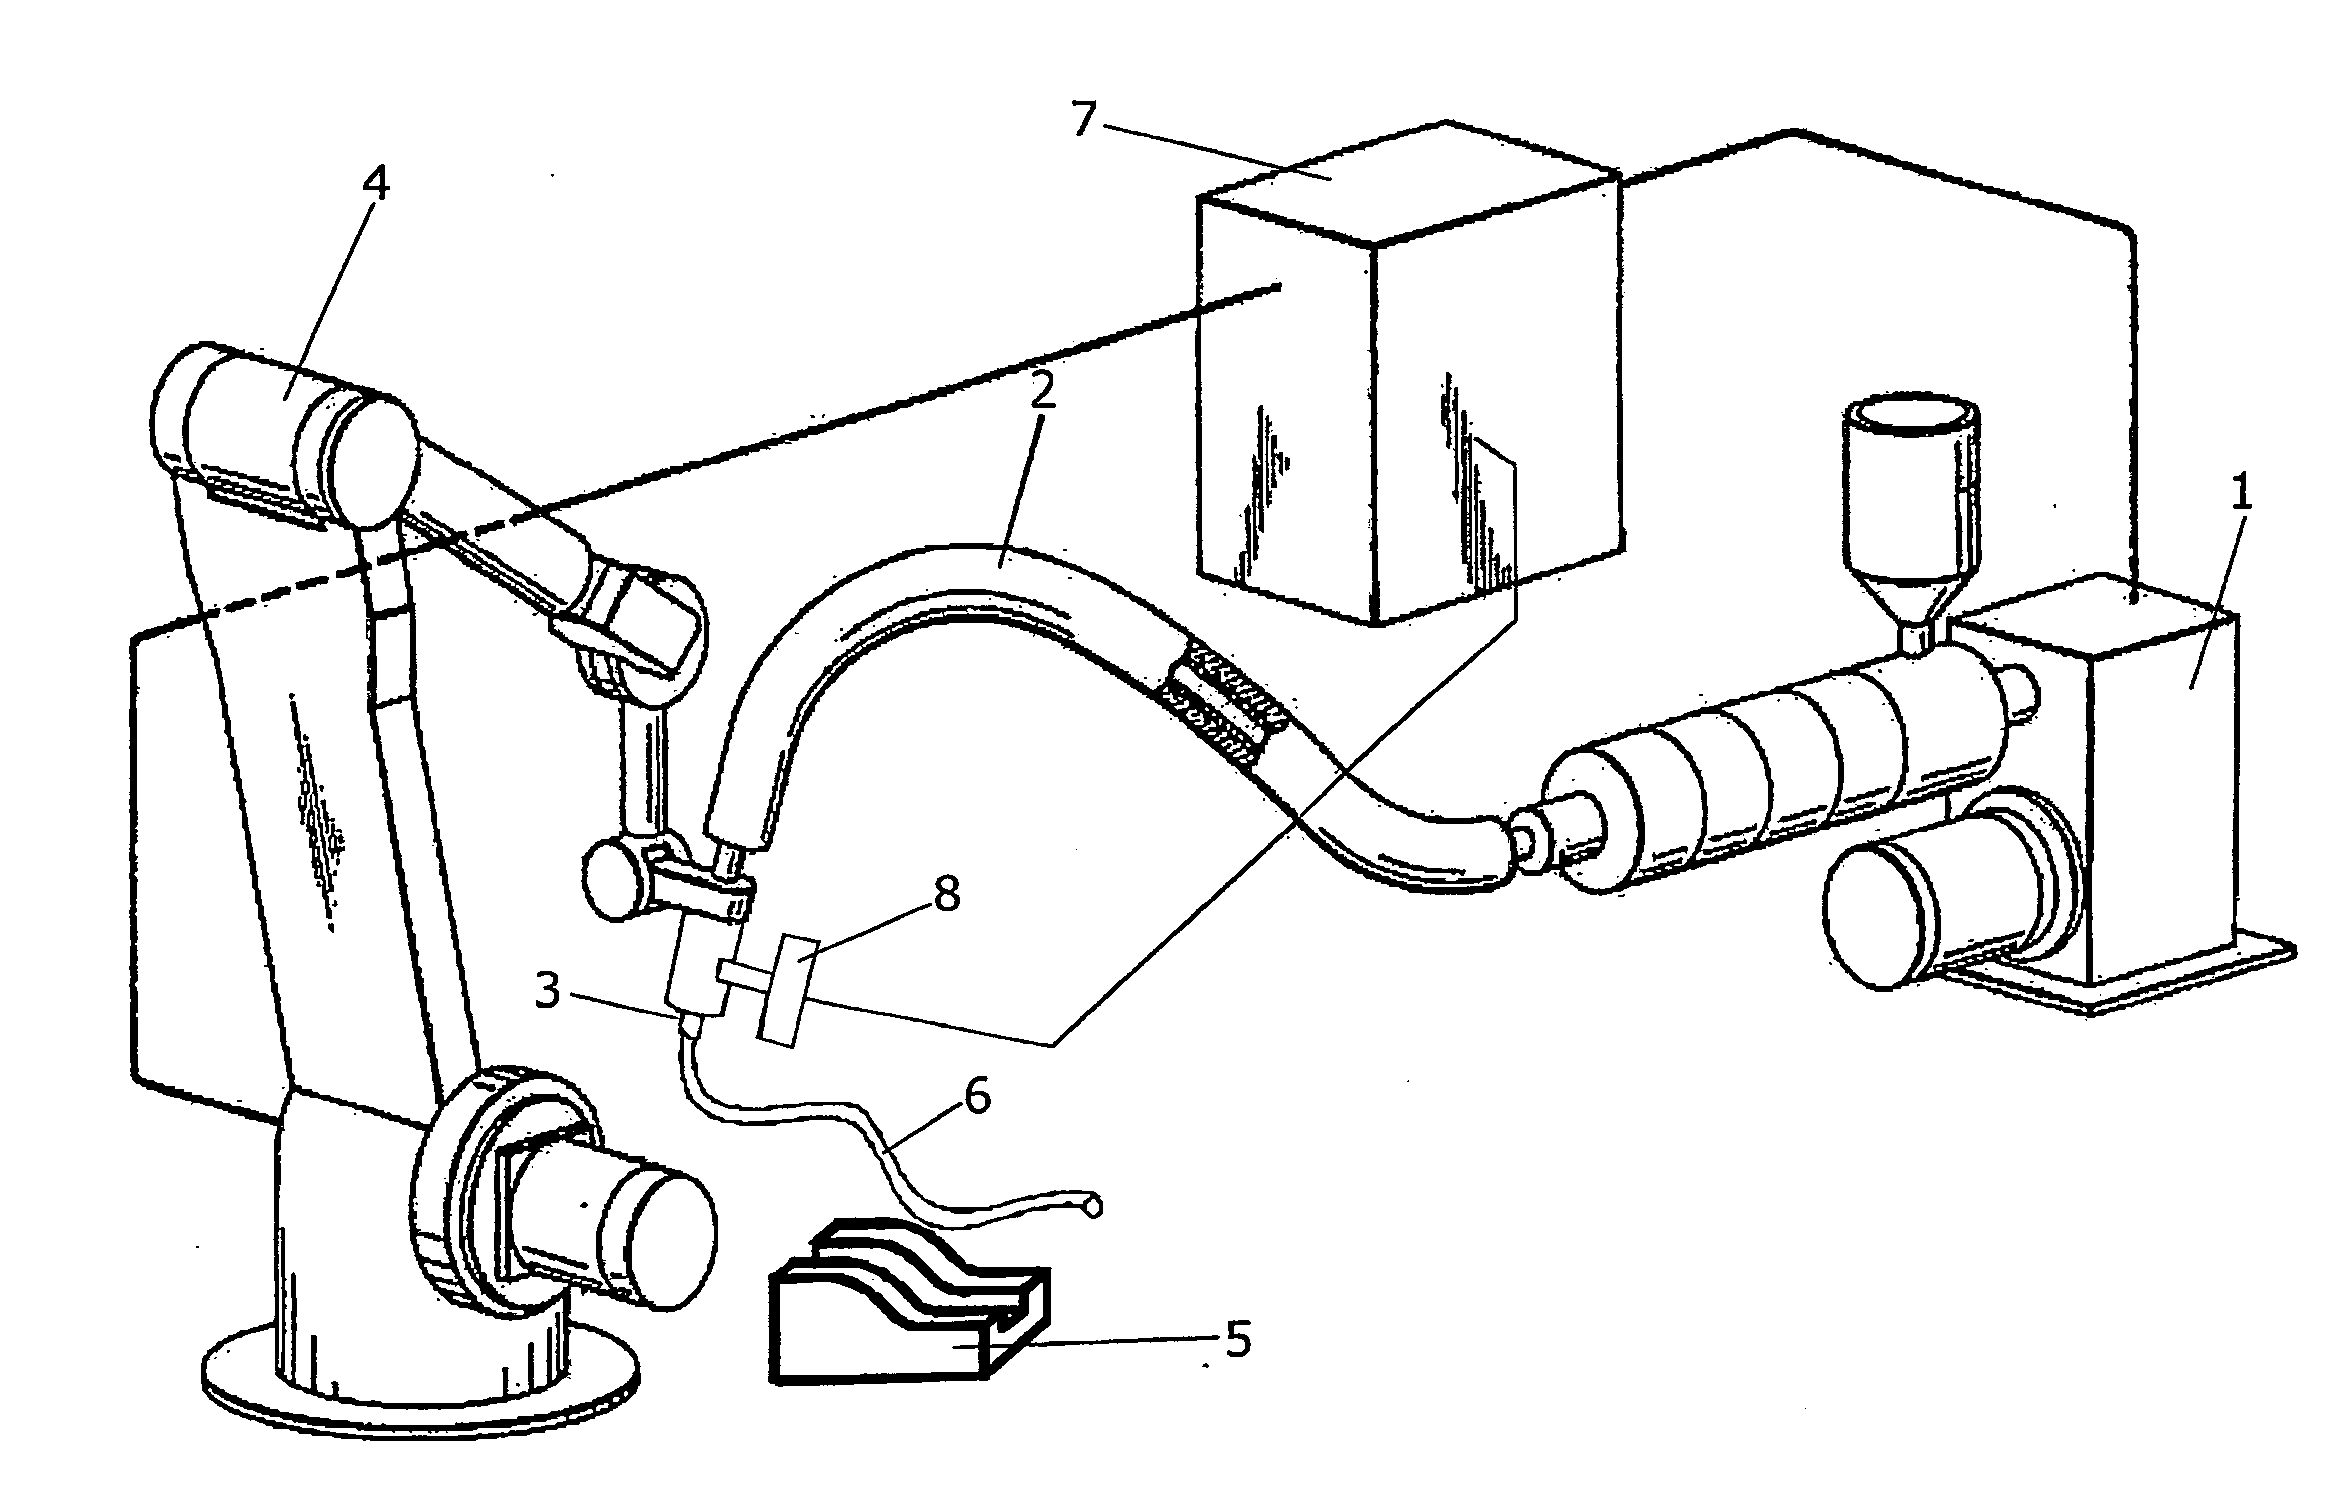 Manufacturing of Shaped Coolant Hoses